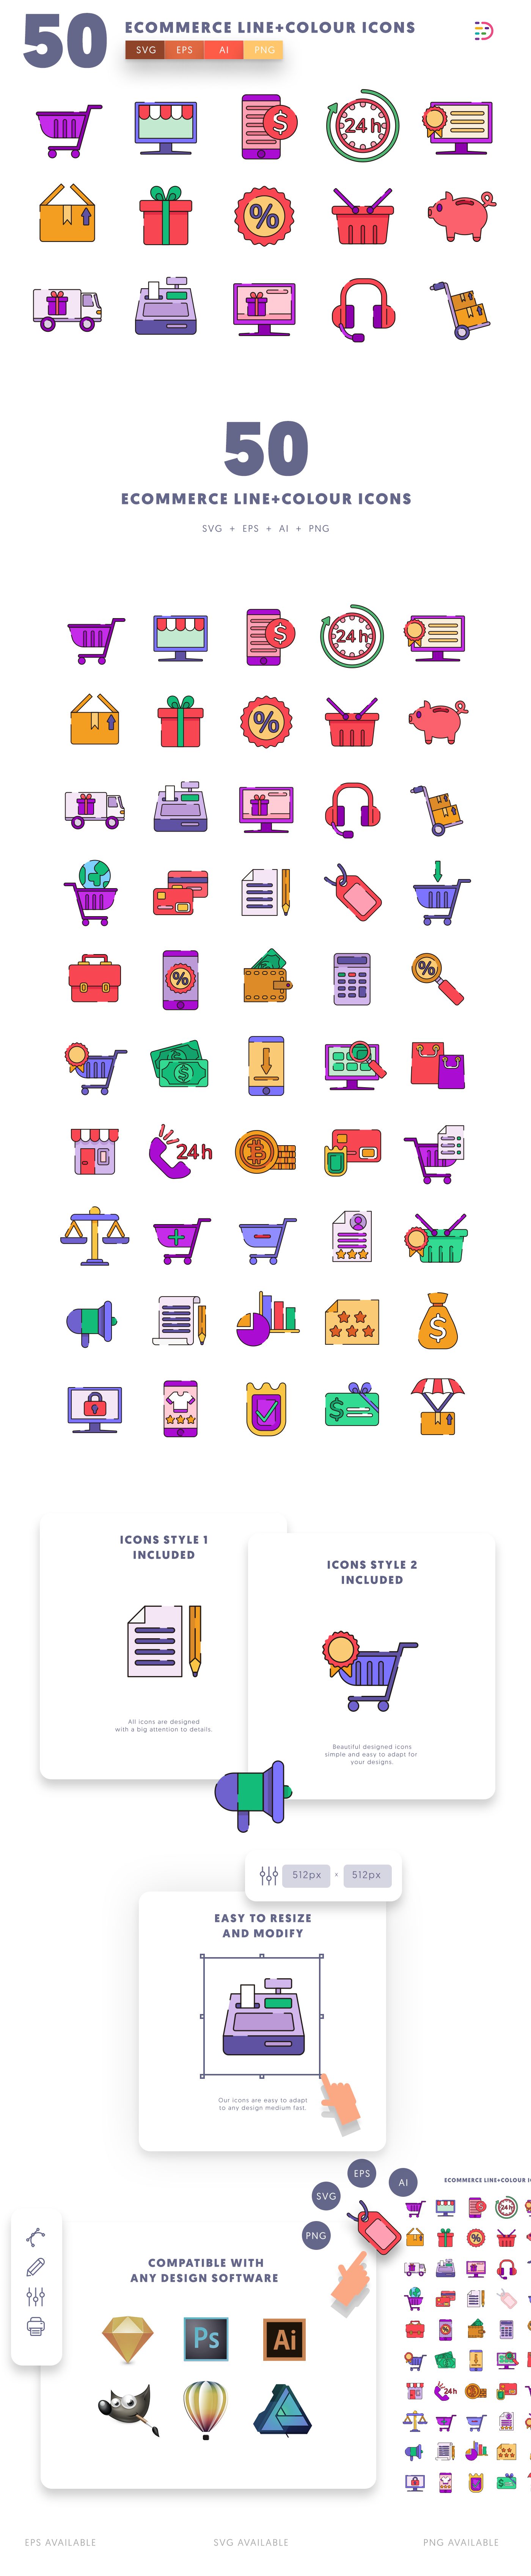 Ecommerce Line+Colour icons info graphic